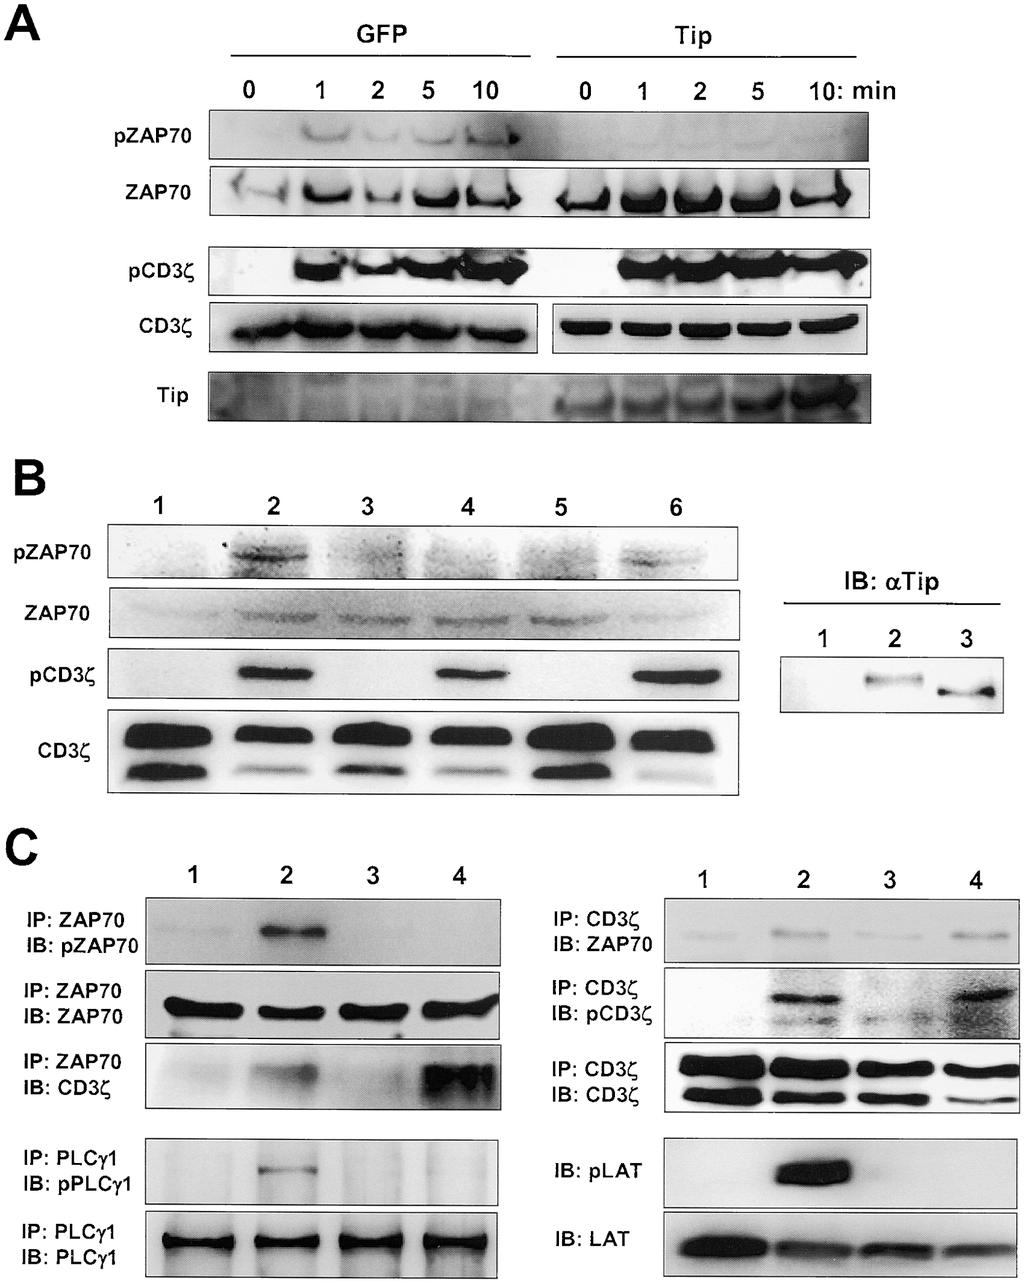 Figure 2. Inhibition of ZAP70 activation by Tip expression. (A) Inhibition of ZAP70 phosphorylation by Tip expression.